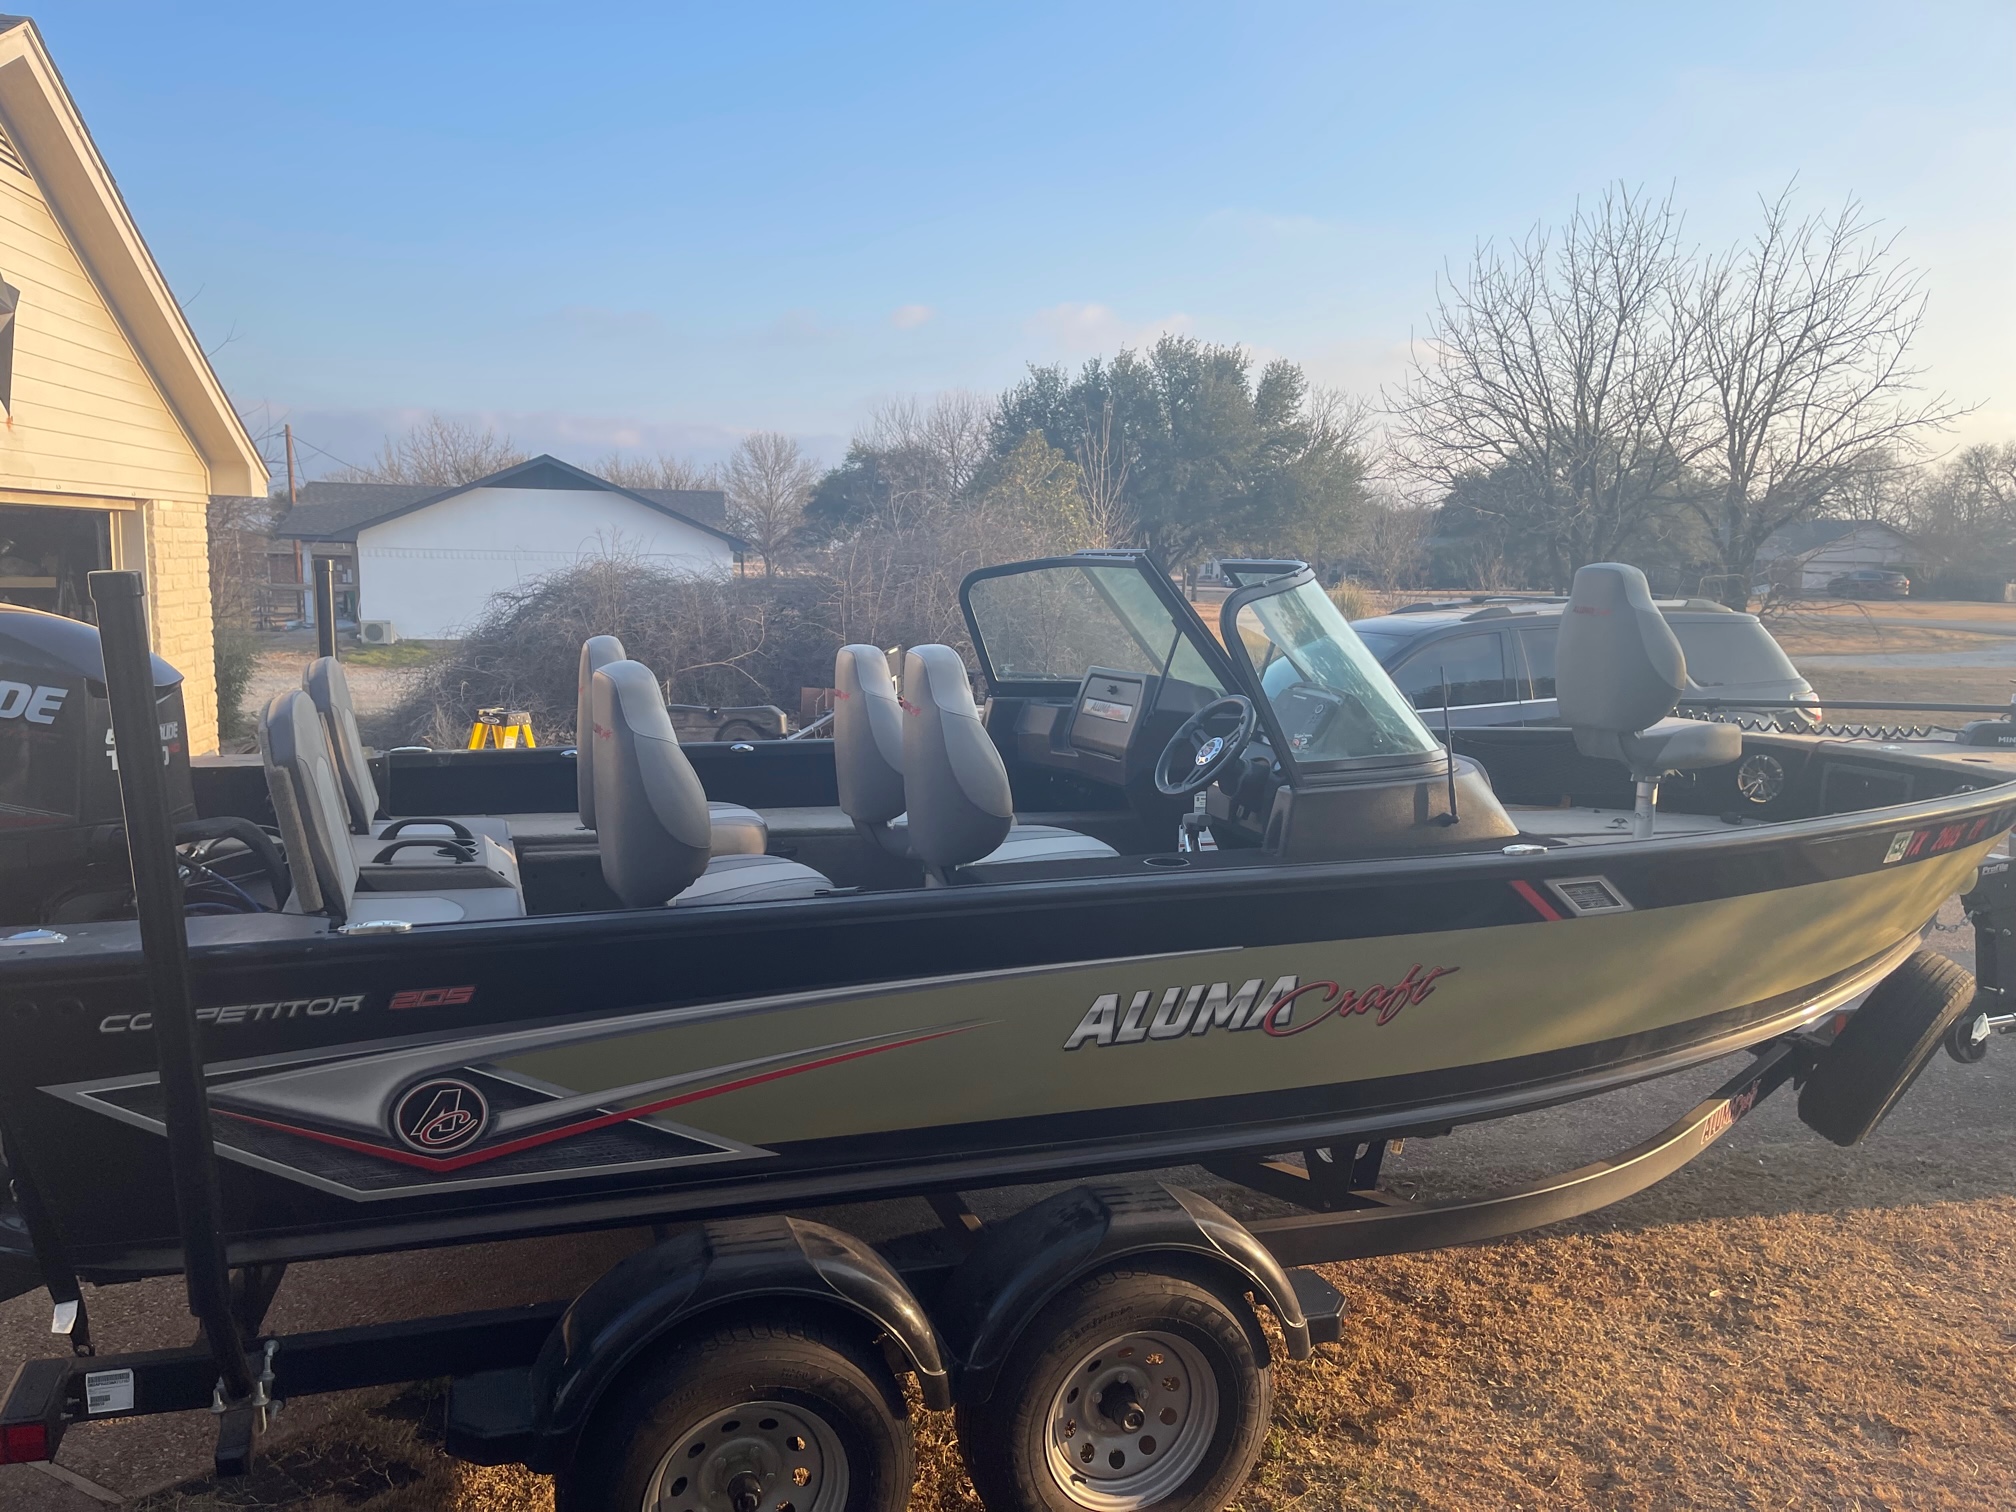 2020 Alumacraft 205 Competitor Power boat for sale in Waco, TX - image 4 